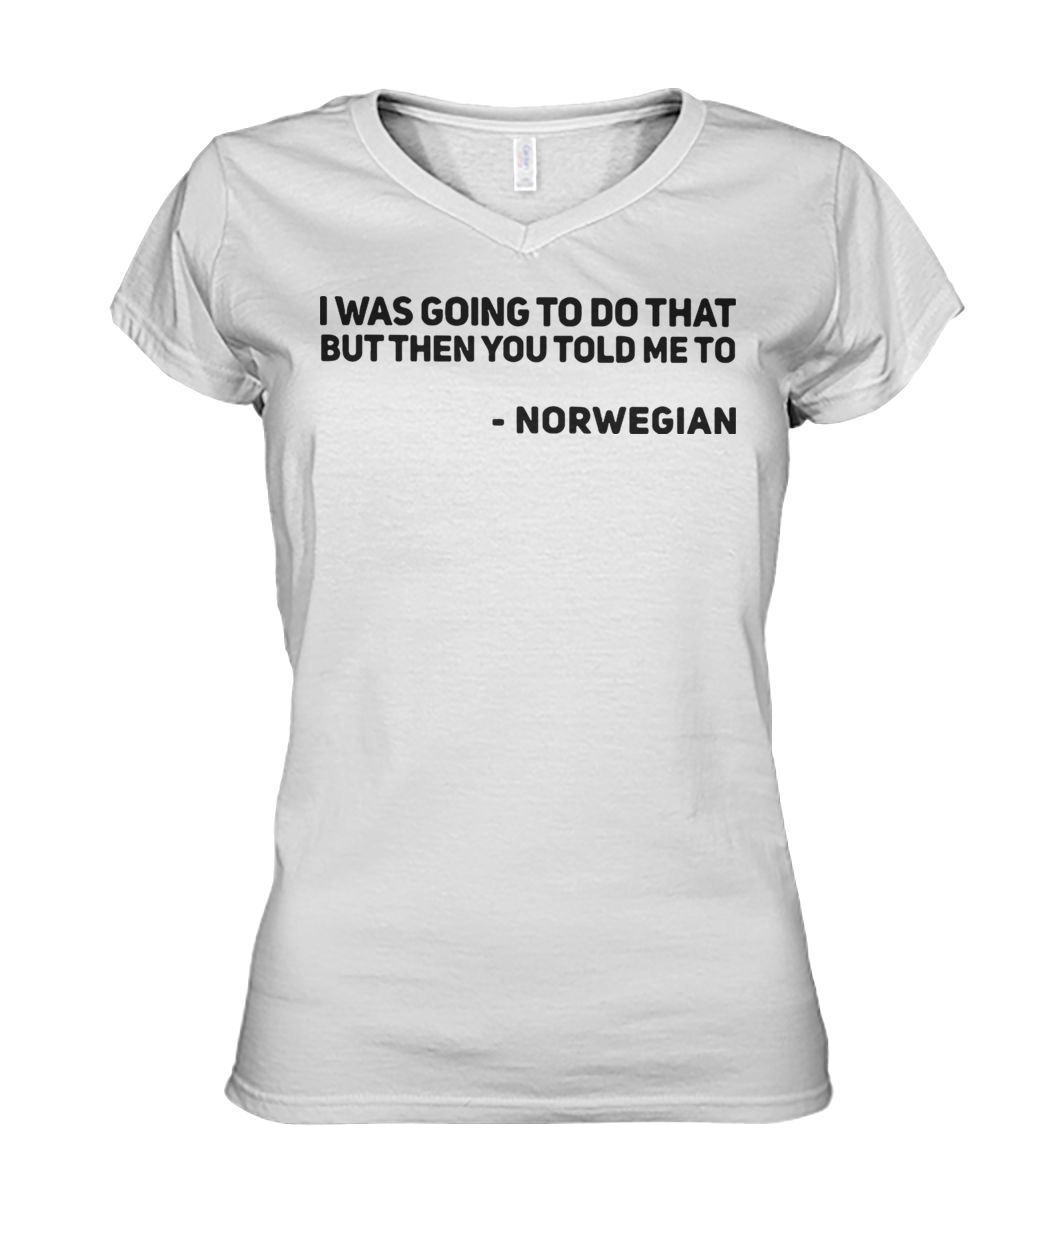 I was going to do that but then you told me to norwegian women's v-neck